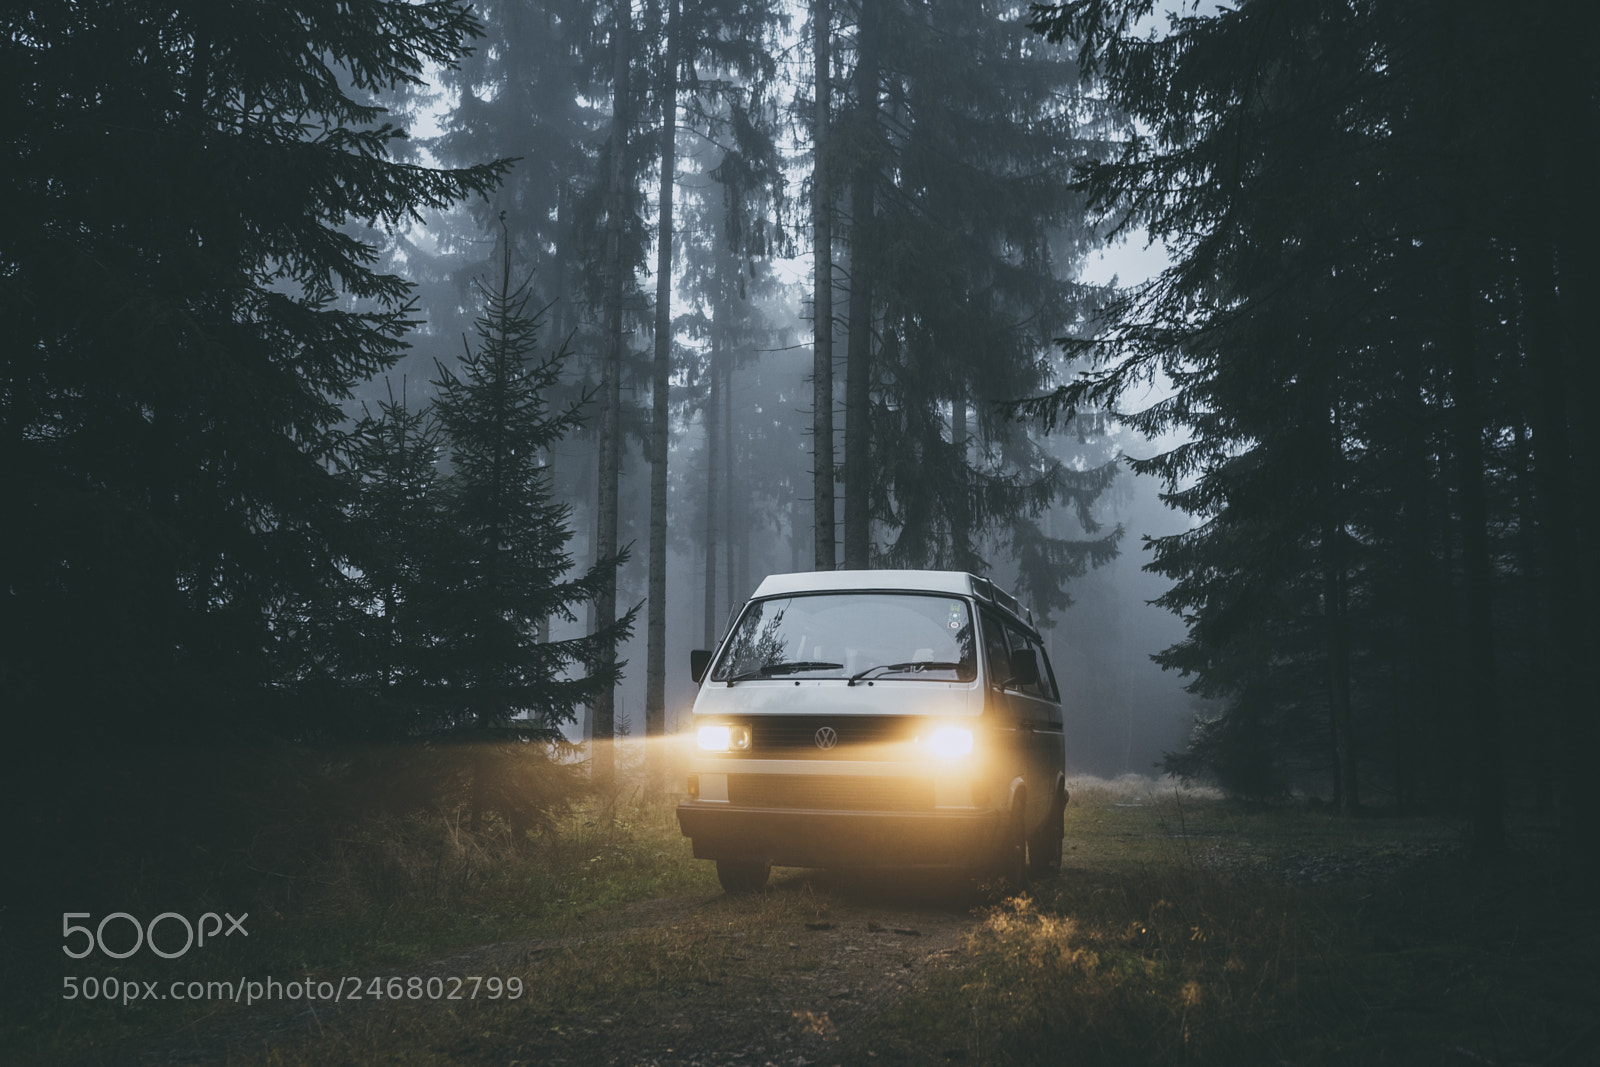 Sony a7 II sample photo. Moody drives in germany photography